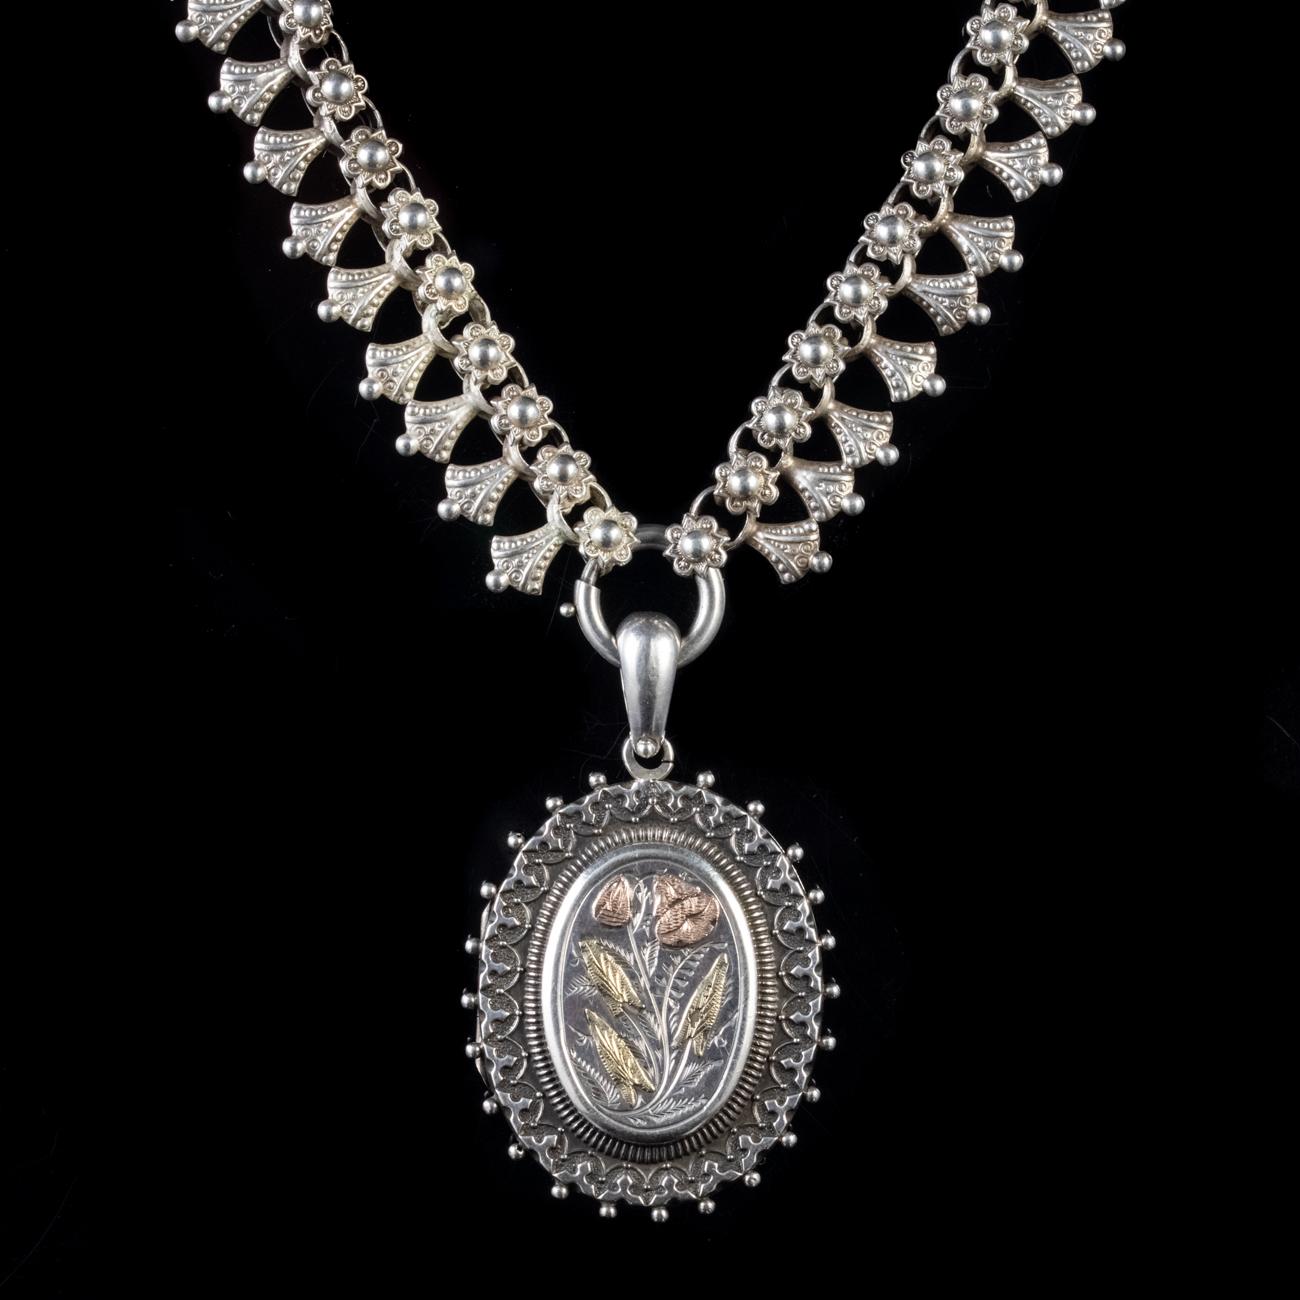 This magnificent Antique Victorian collar and locket has been masterfully commissioned in Sterling Silver. The collar boasts intricate and ornate links which finish at a ring clasp to hold the locket. The locket features engravings of forget me nots